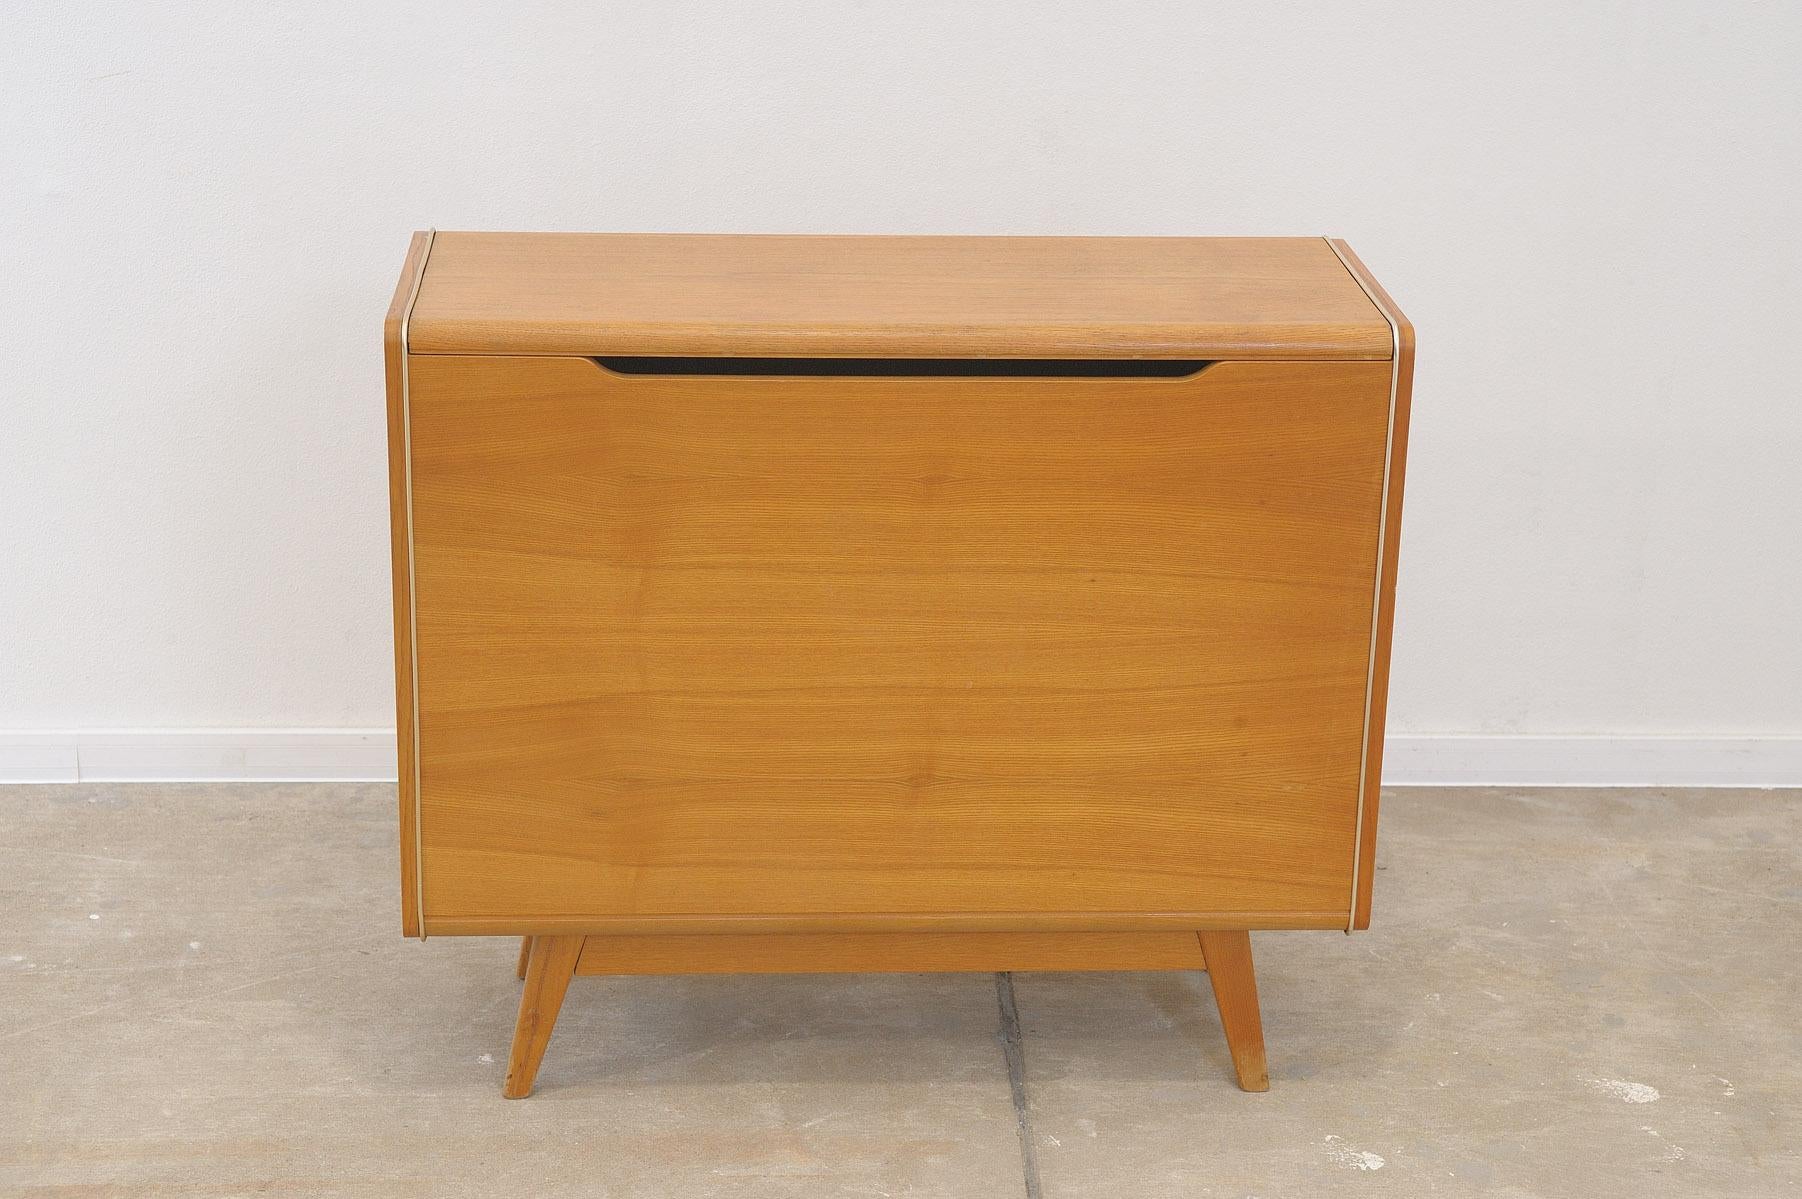 Mid century dresser designed by Hubert Nepožitek & Bohumil Landsman for Jitona in the 1970´s.
It was made as a part of living room sector model U-372386. Made in Czechoslovakia.
In very good Vintage condition, showing slight signs of age and using.